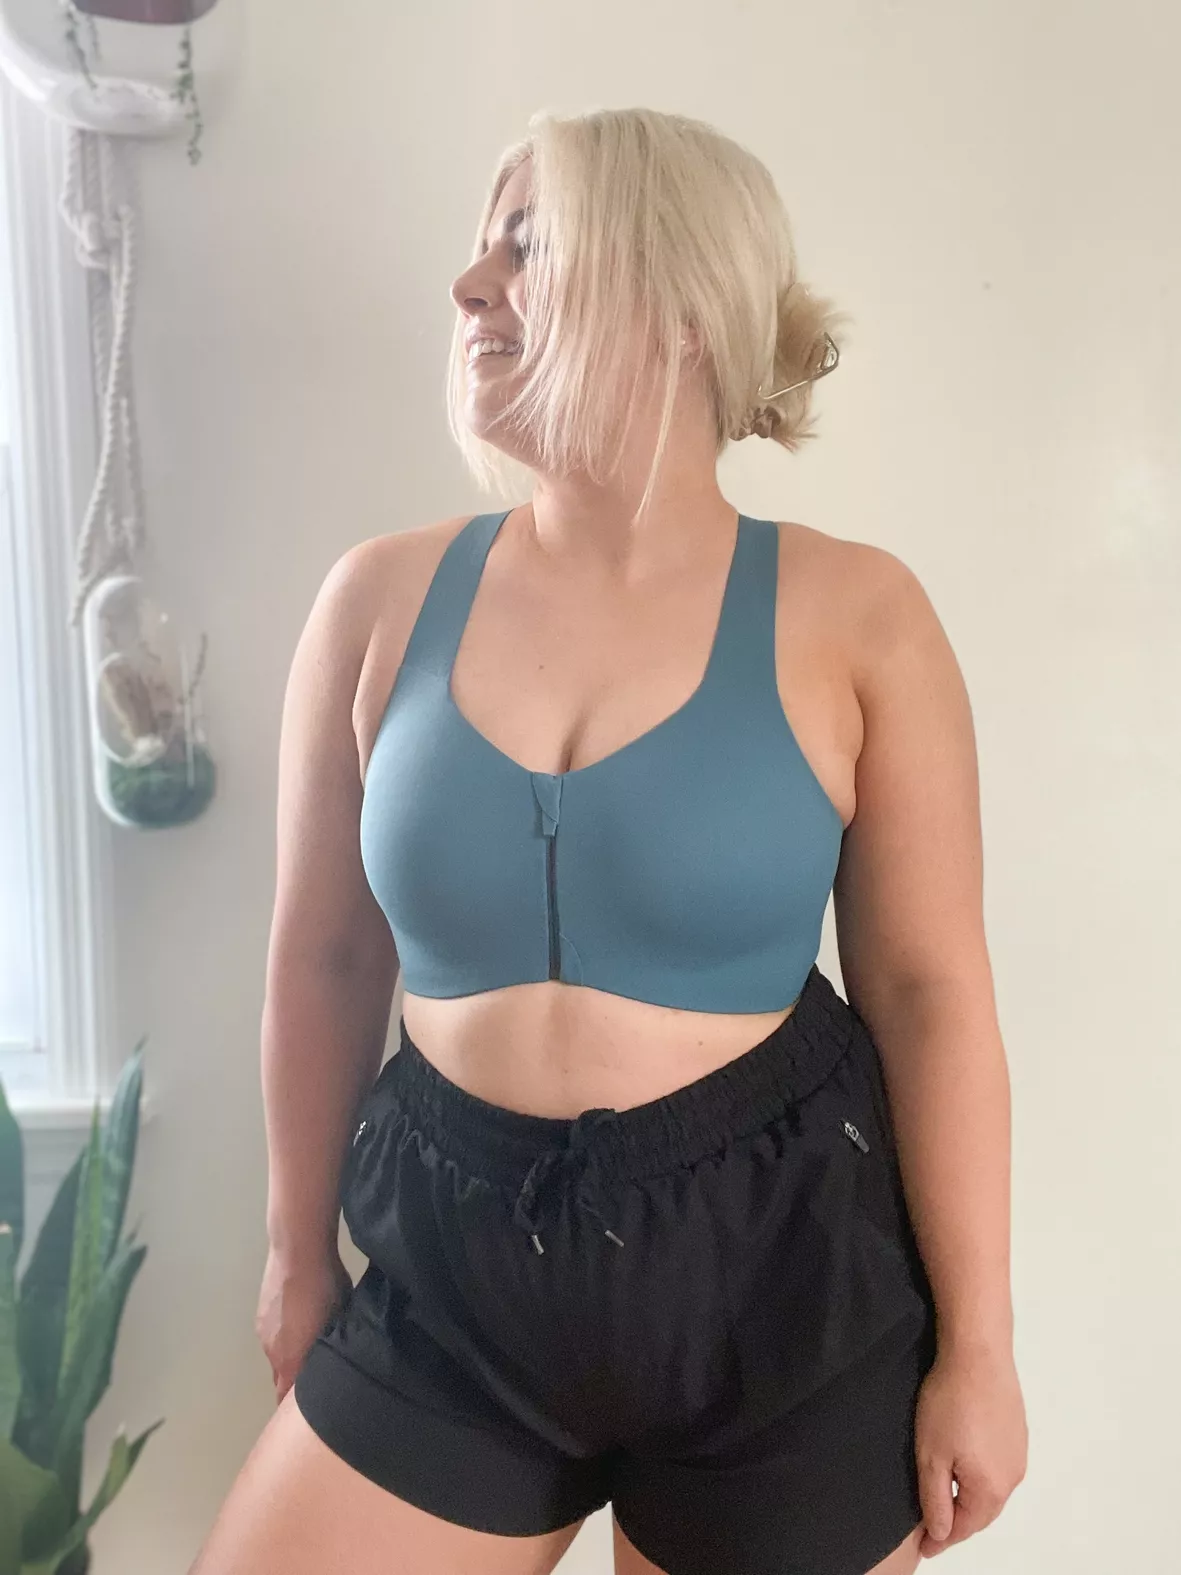 Pin on Front closure sports bra